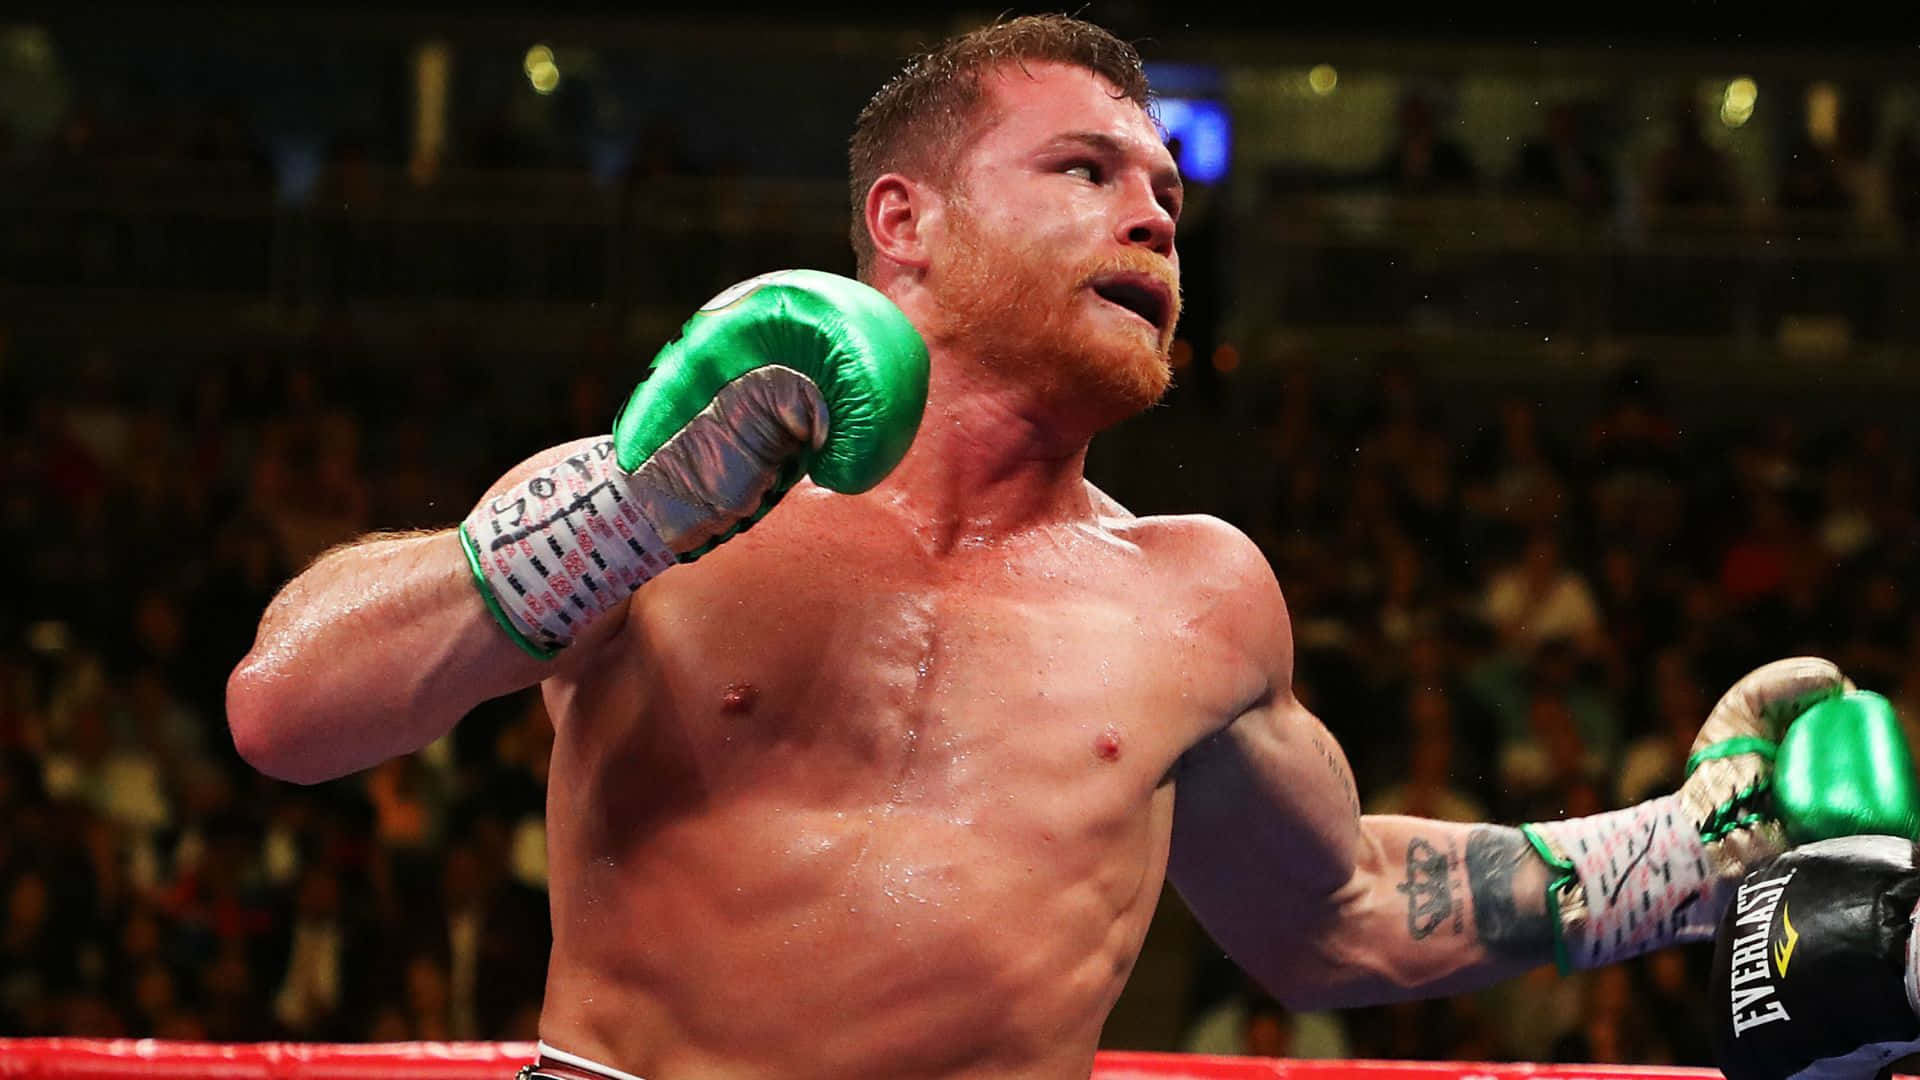 Saul "canelo" Alvarez Delivering A Powerful Punch In The Ring Wallpaper